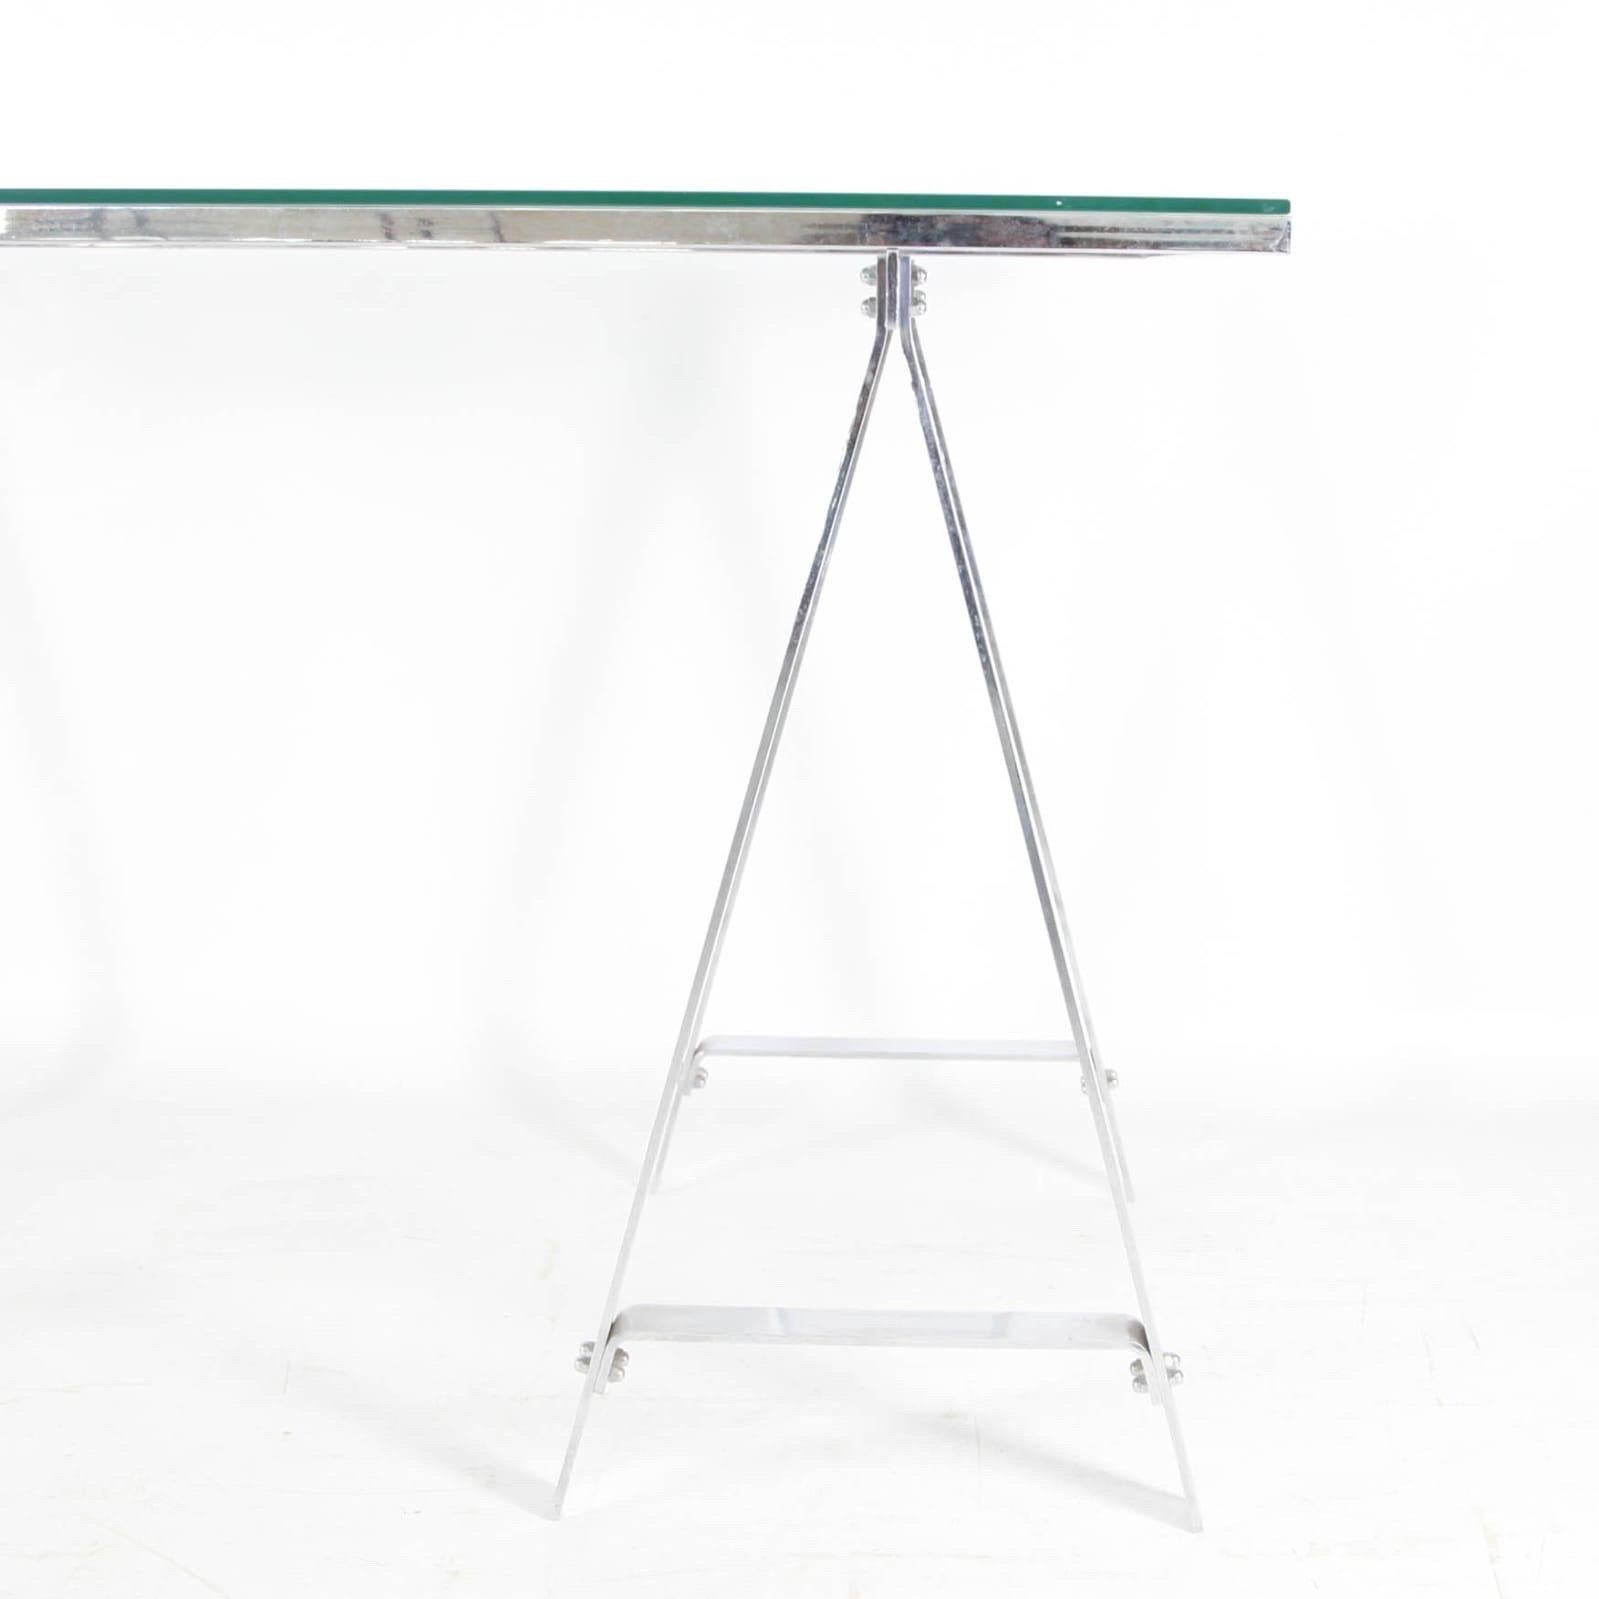 Rare stainless steel desk circa 1970. A thick glass top is on top of a stainless steel frame which adapts to the 2 legs.
Very pure design, great quality and condition.